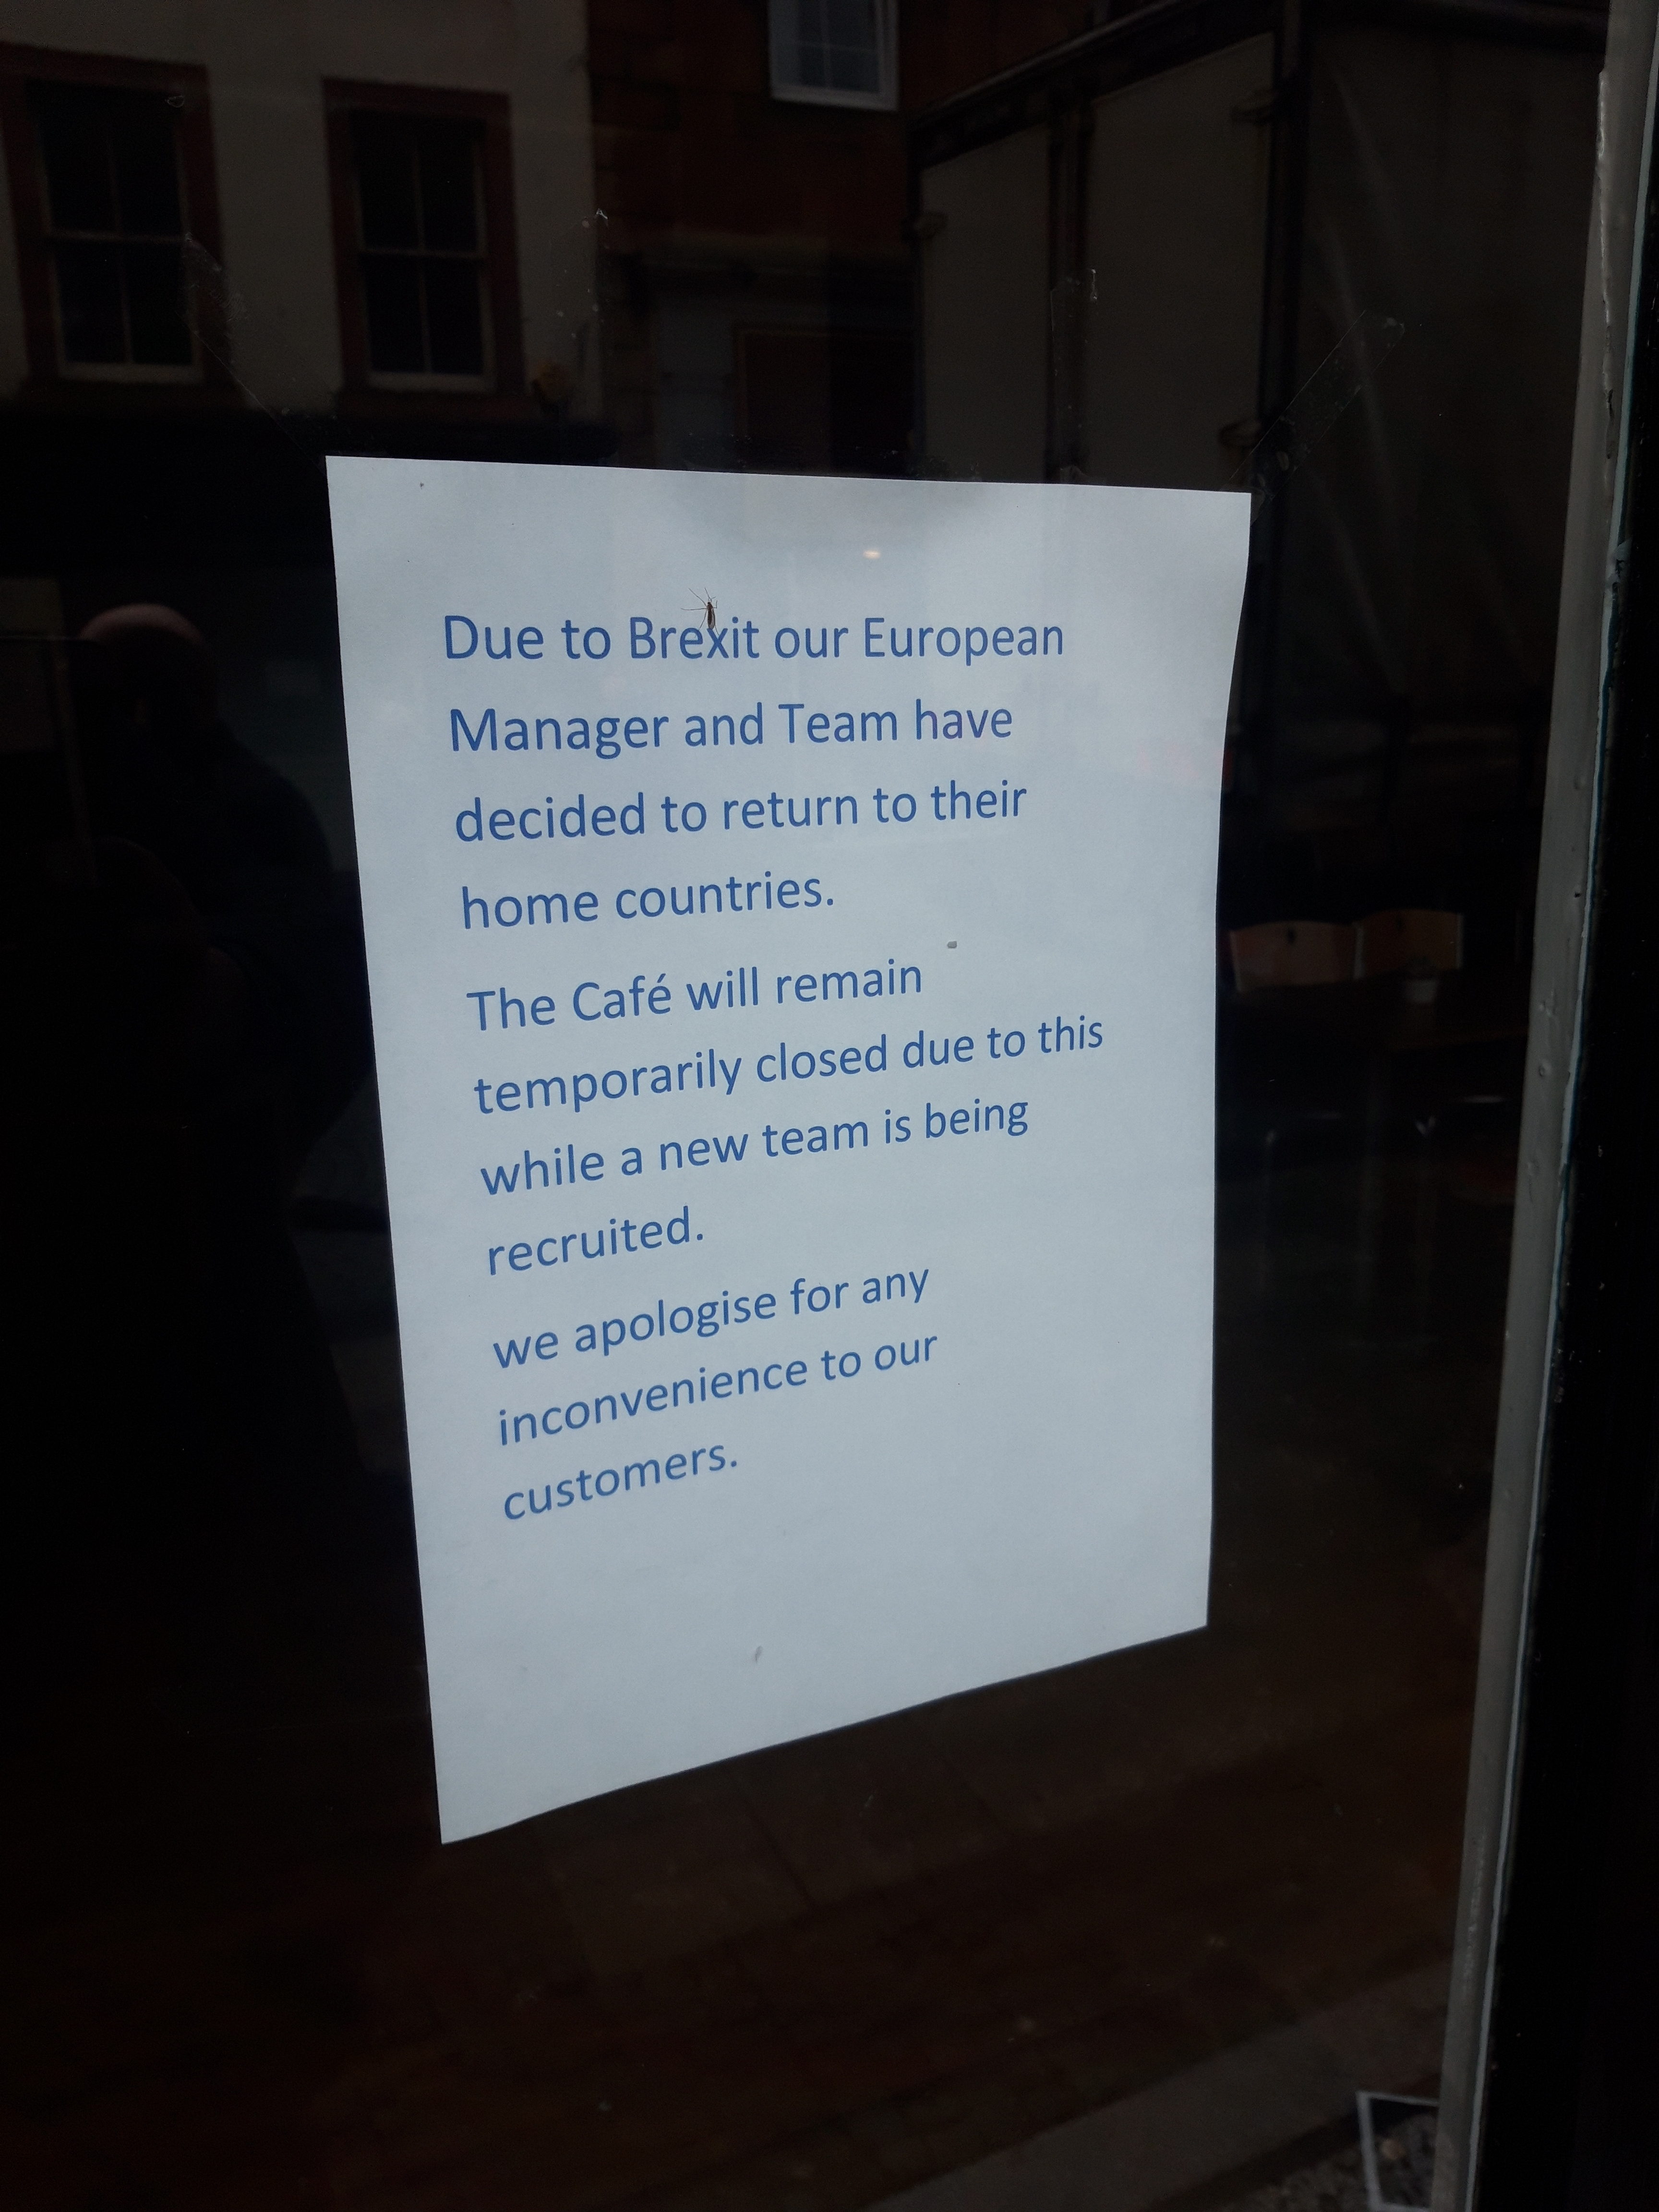 Notice on the window of Cafe Ecosse in Fort William